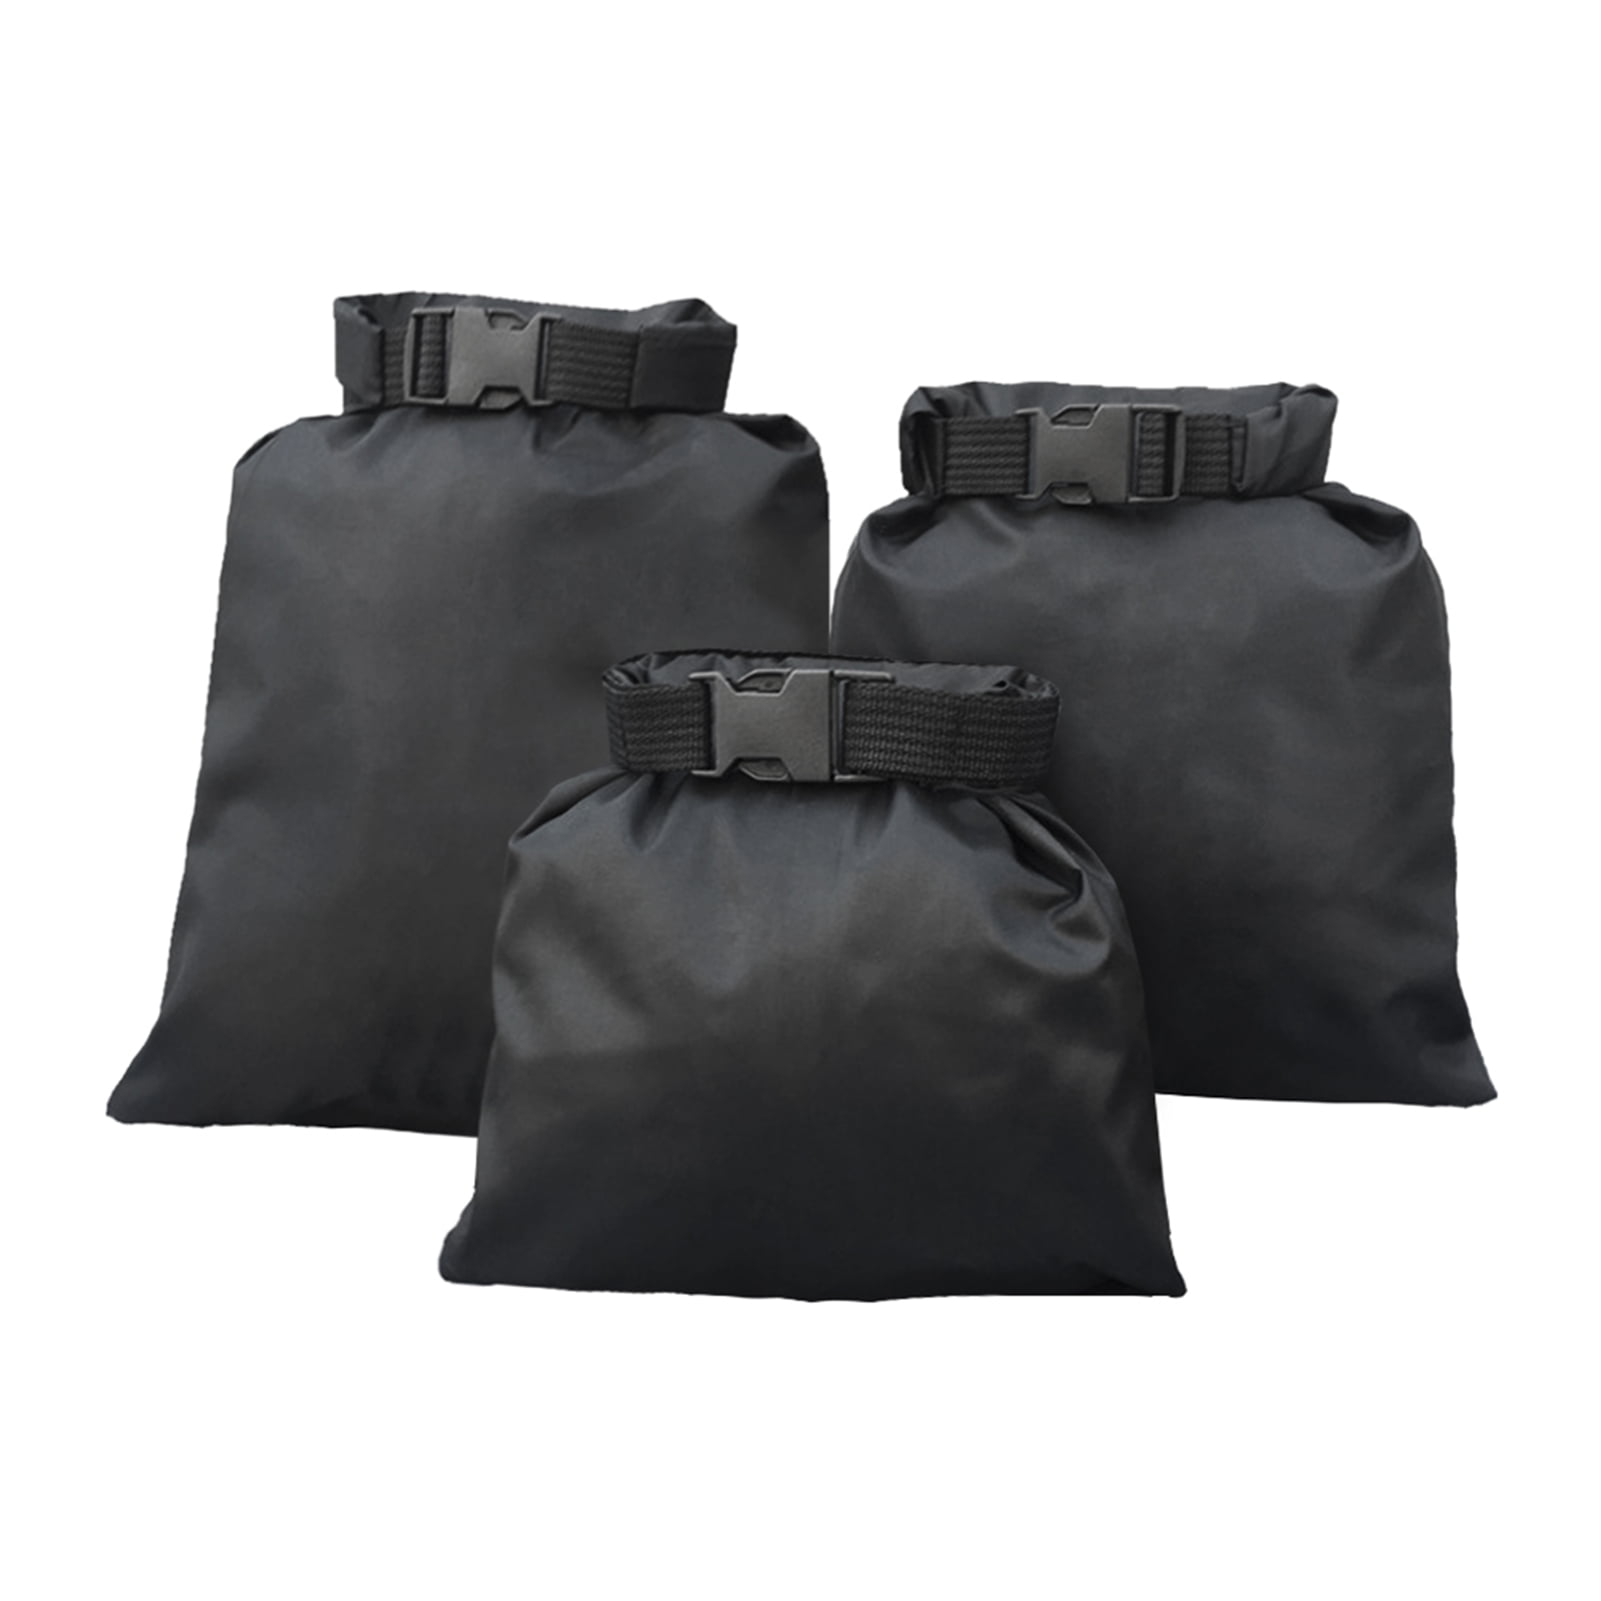 Waterproof Dry Bag 3Pcs Portable Large Outdoor Storage Sacks for Camping Boating 